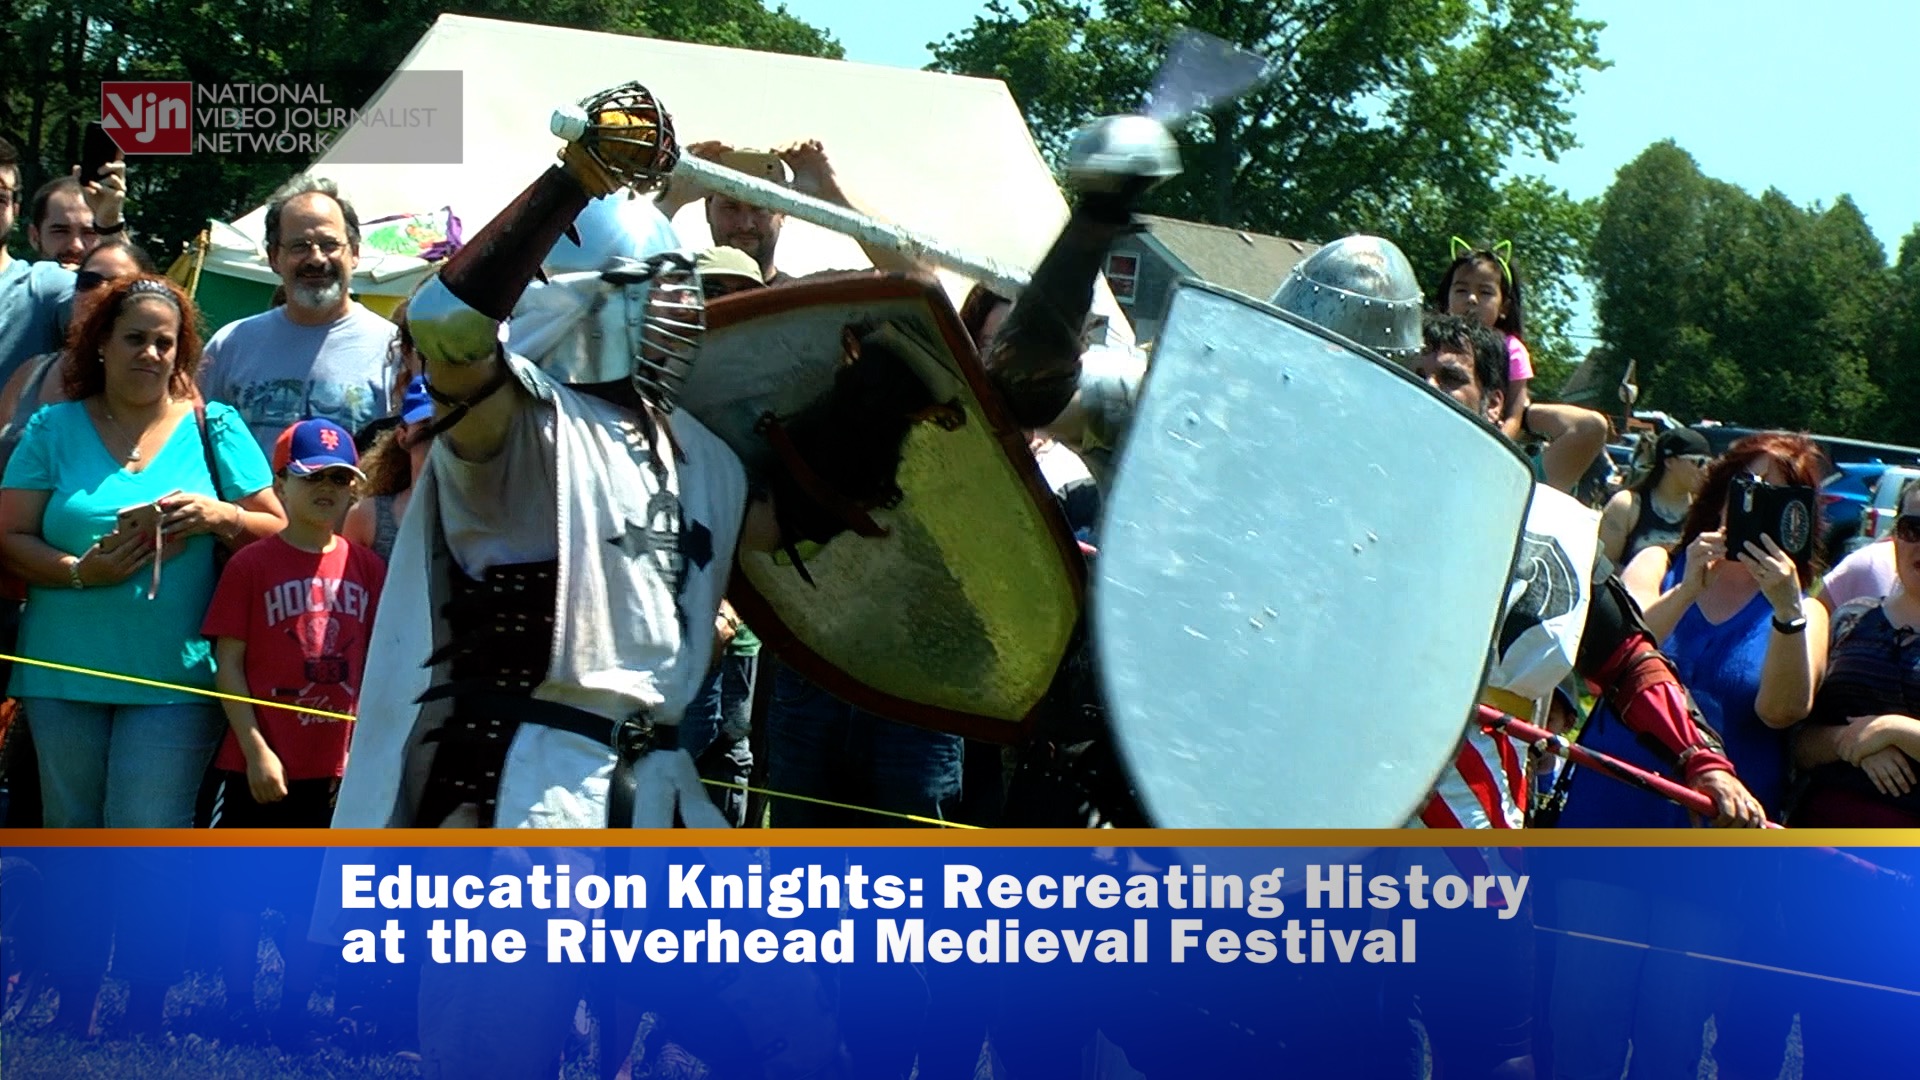 Education Knights: Inside The Riverhead Medieval Festival